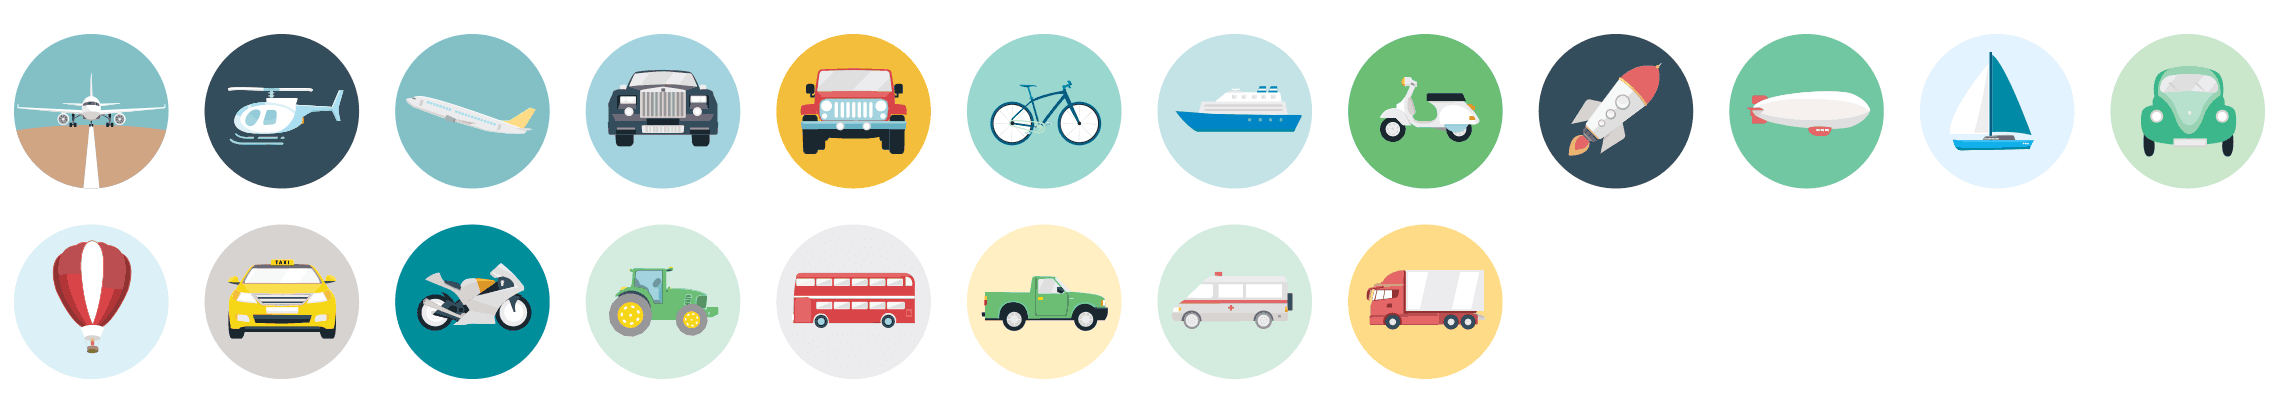 transportation-flat-icons-vol-1-preview